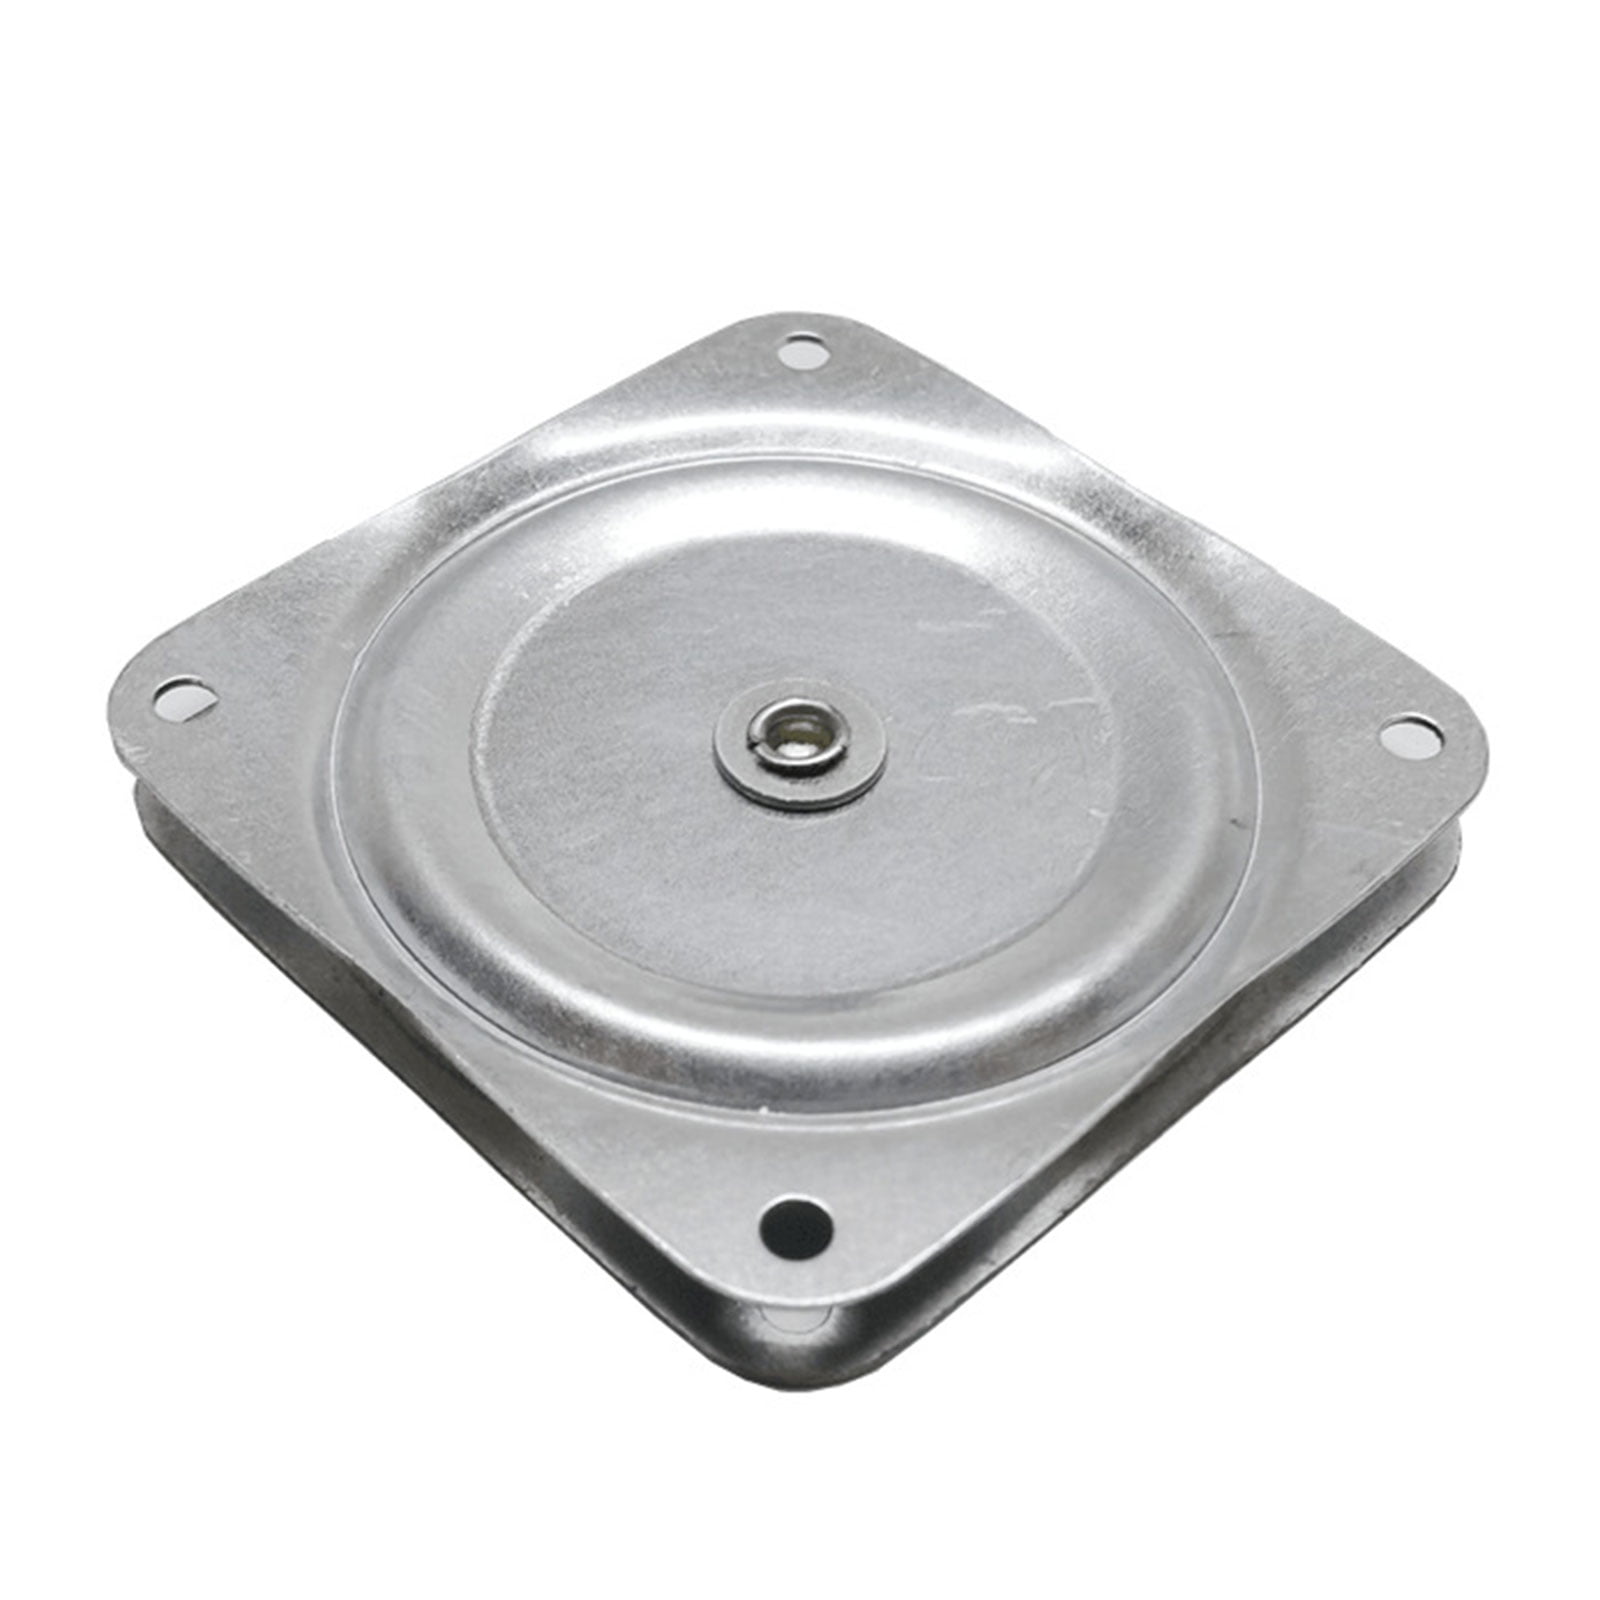 Heavy Duty Ball Bearing Swivel Plate Lazy Susan Square Rotating Bearing  Plate Turntable Base Hardware Easy to Install 